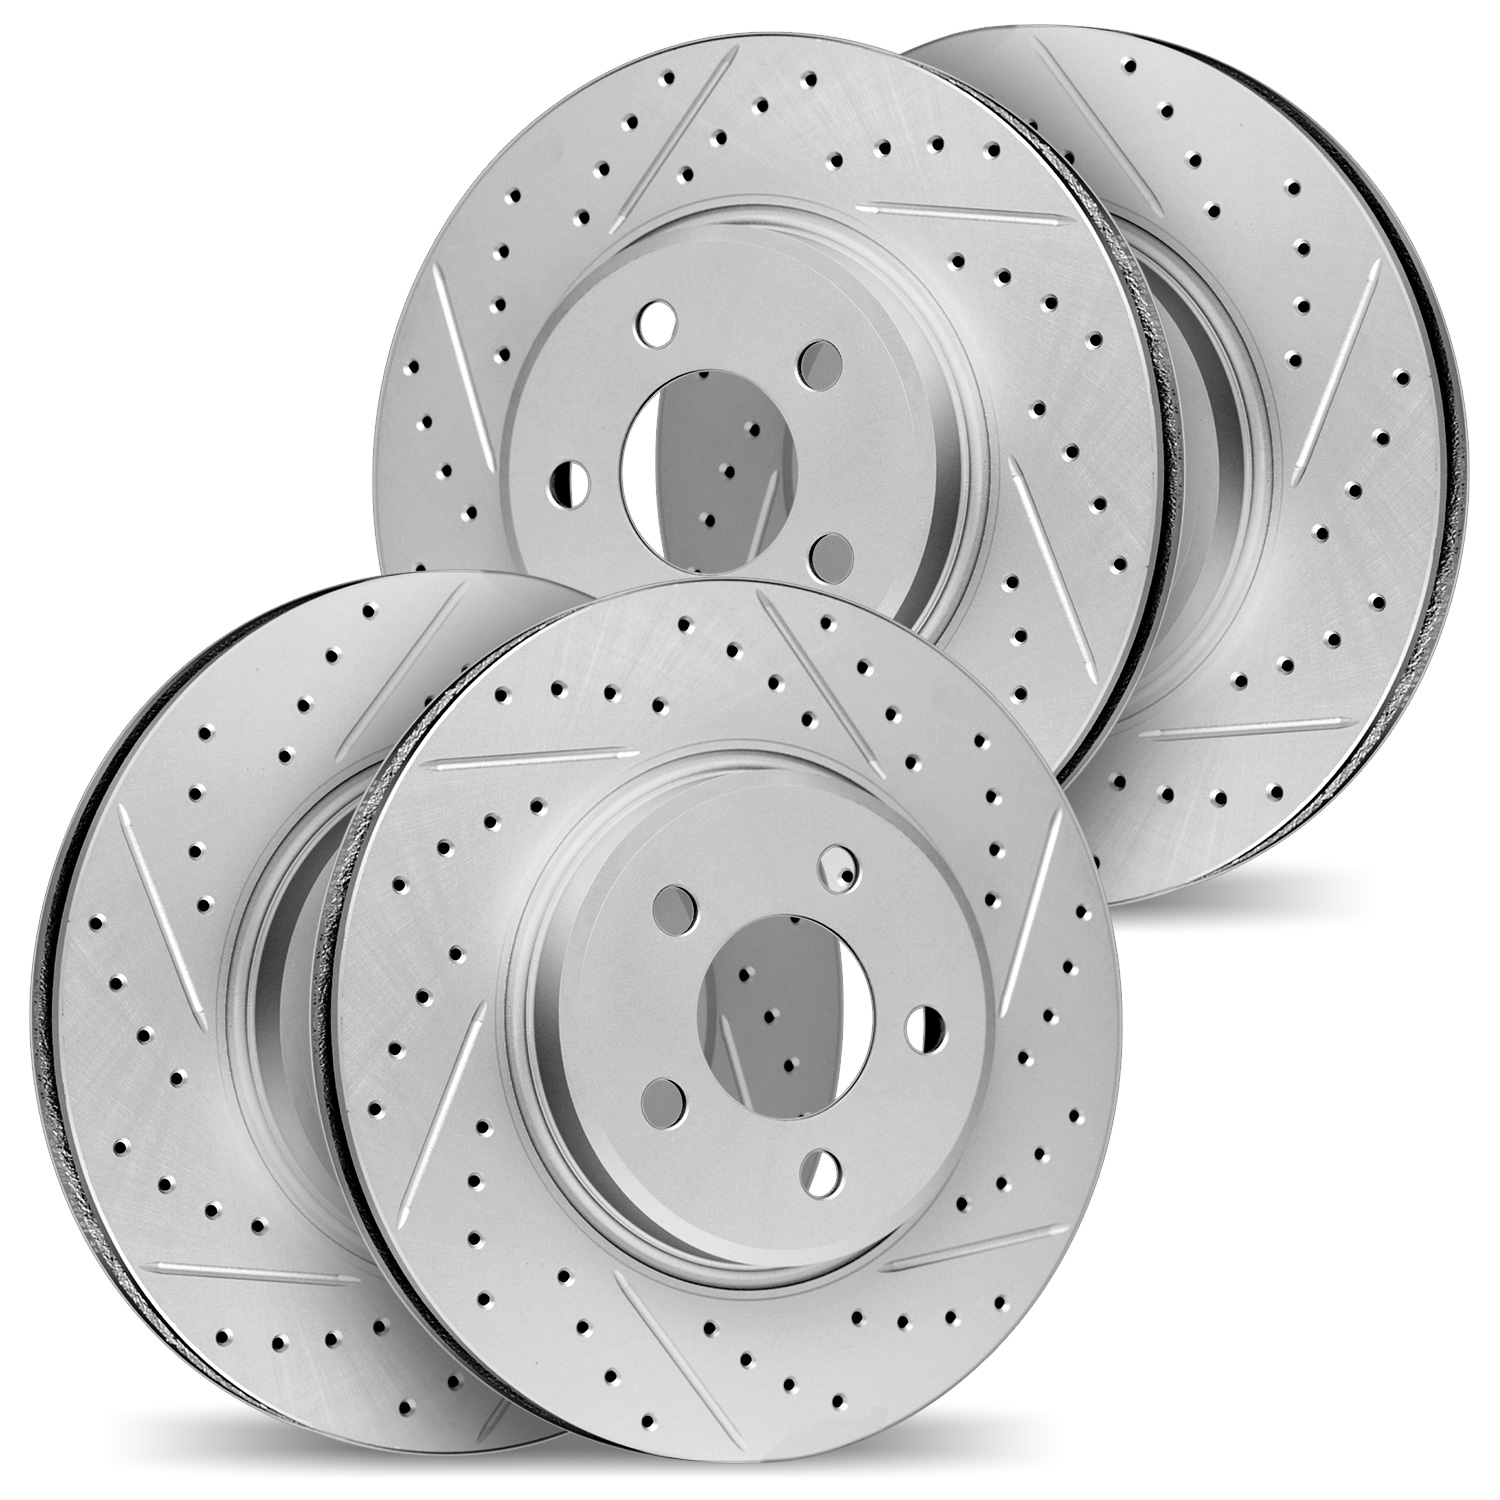 2004-03006 Geoperformance Drilled/Slotted Brake Rotors, 2018-2020 Kia/Hyundai/Genesis, Position: Front and Rear